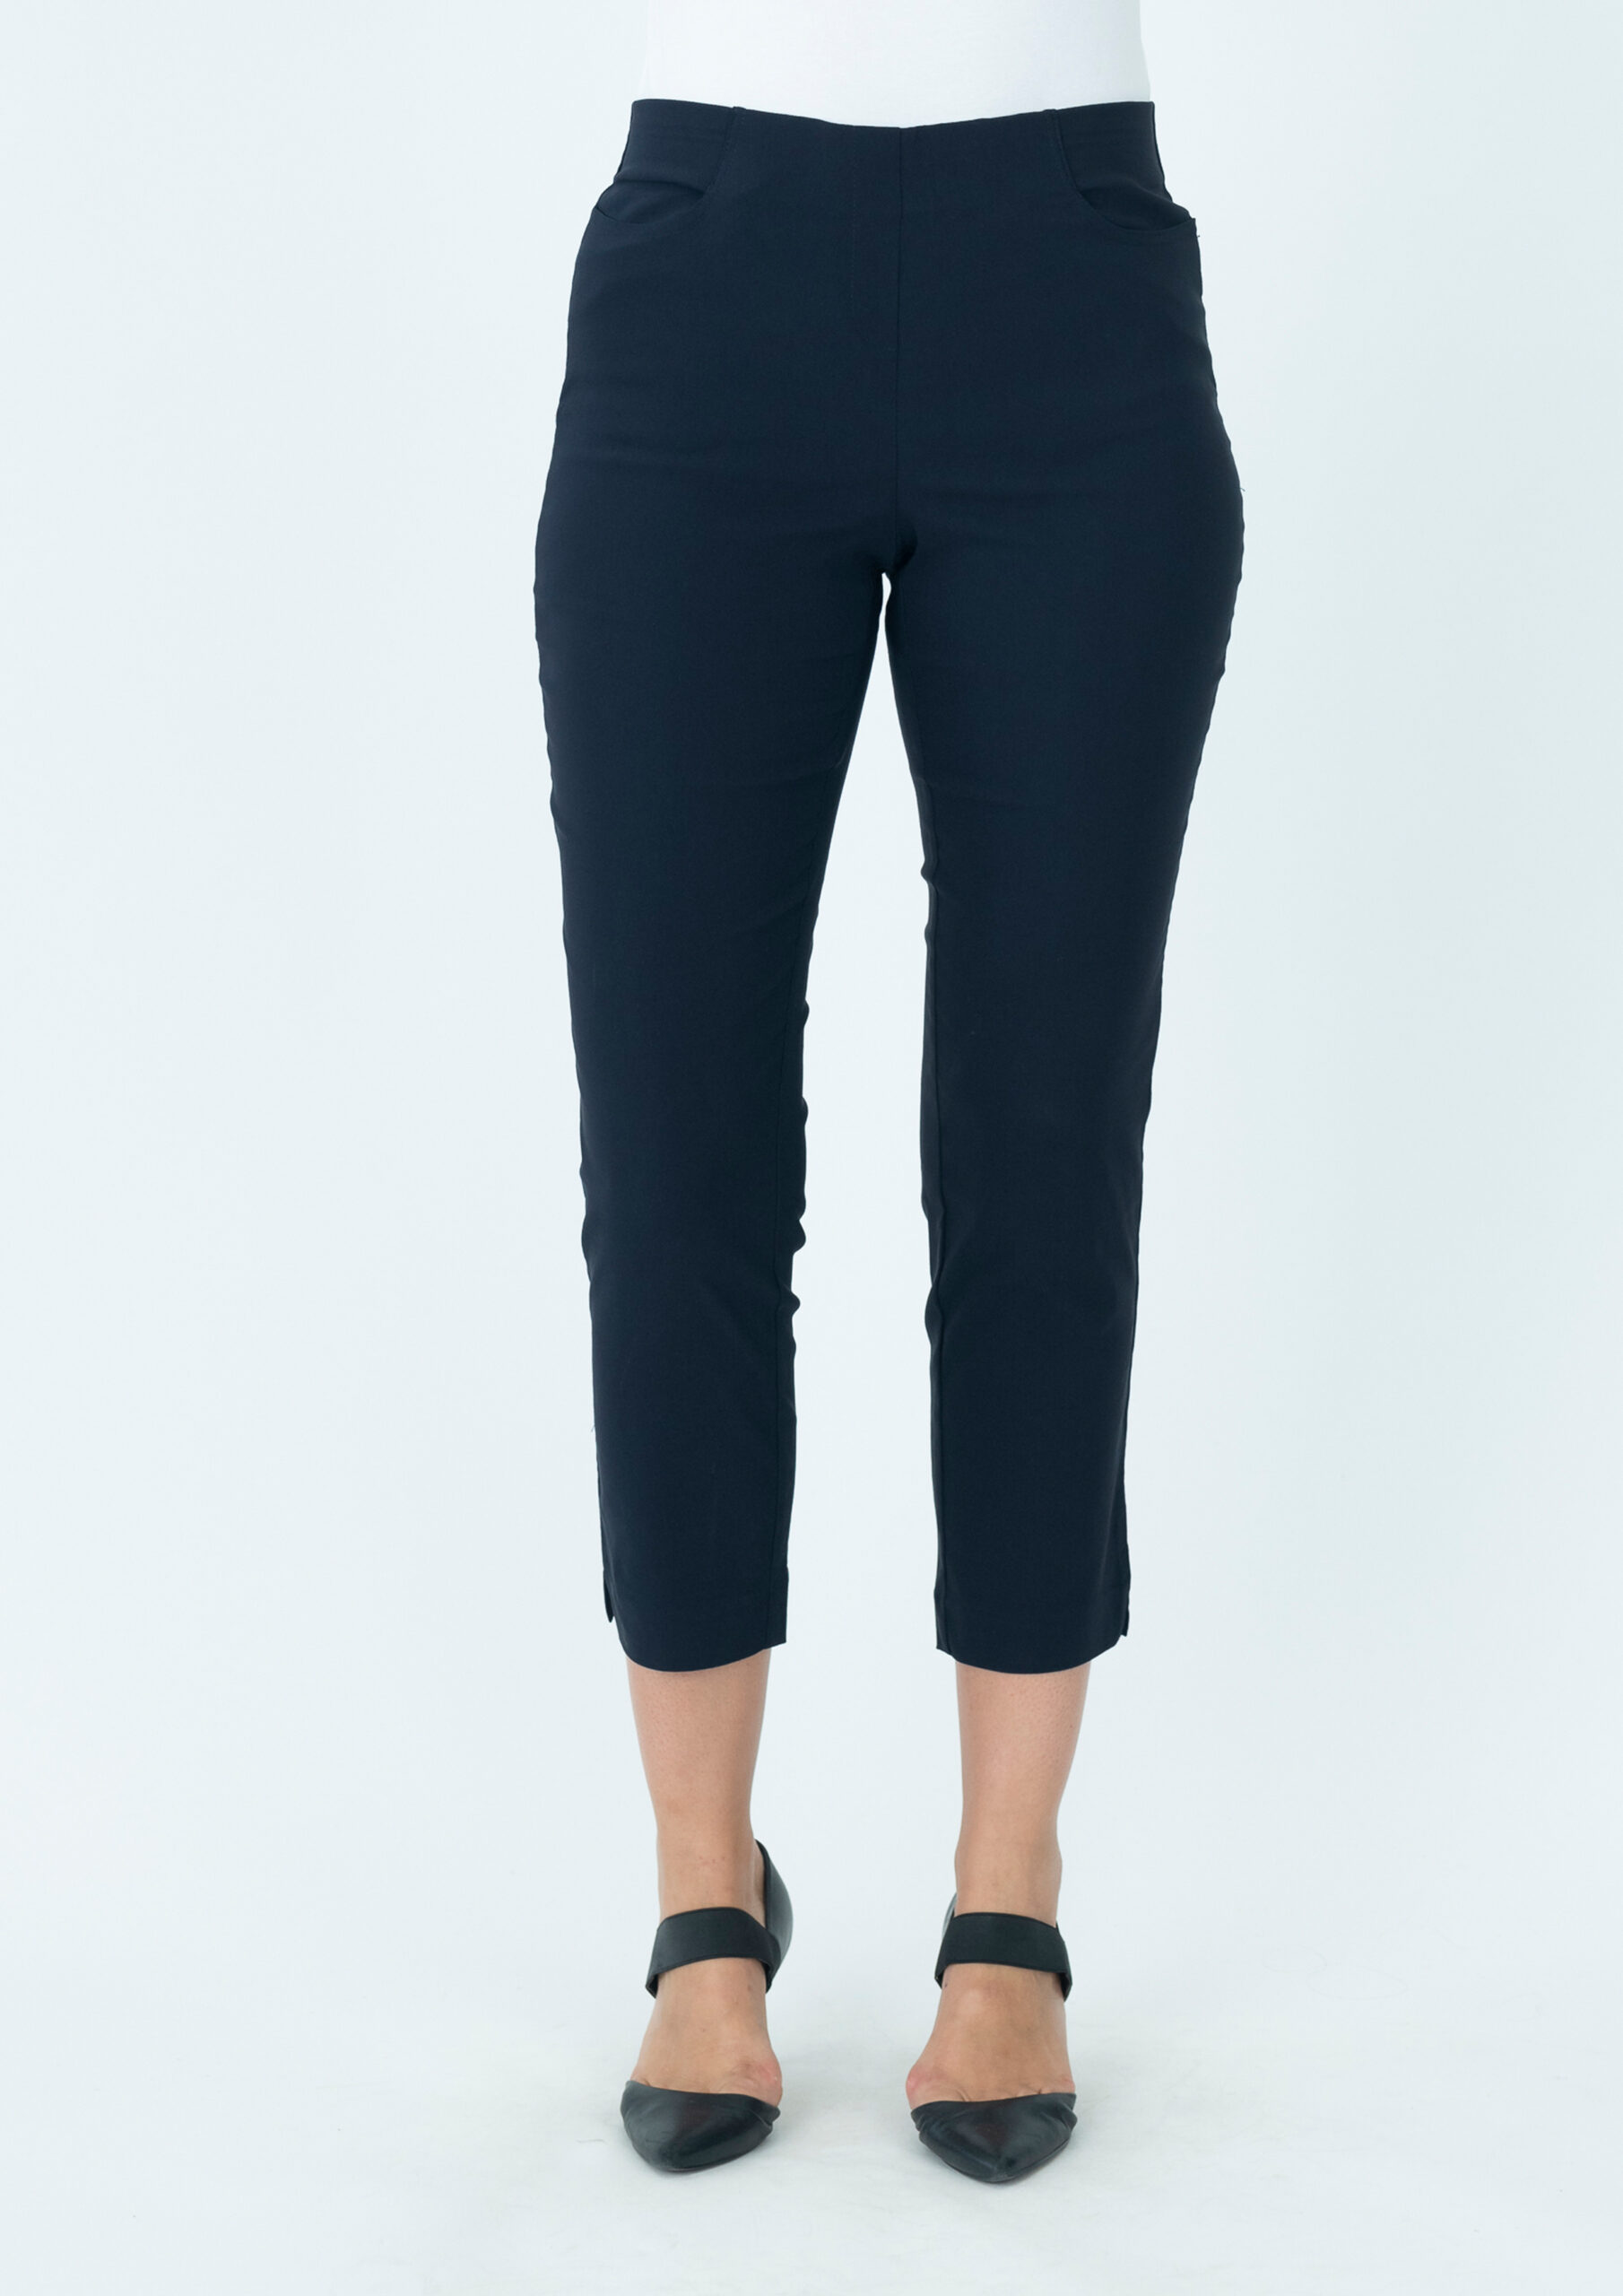 Renoma 7/8 Stretch Pants 2 colours - Lesleys of Gawler